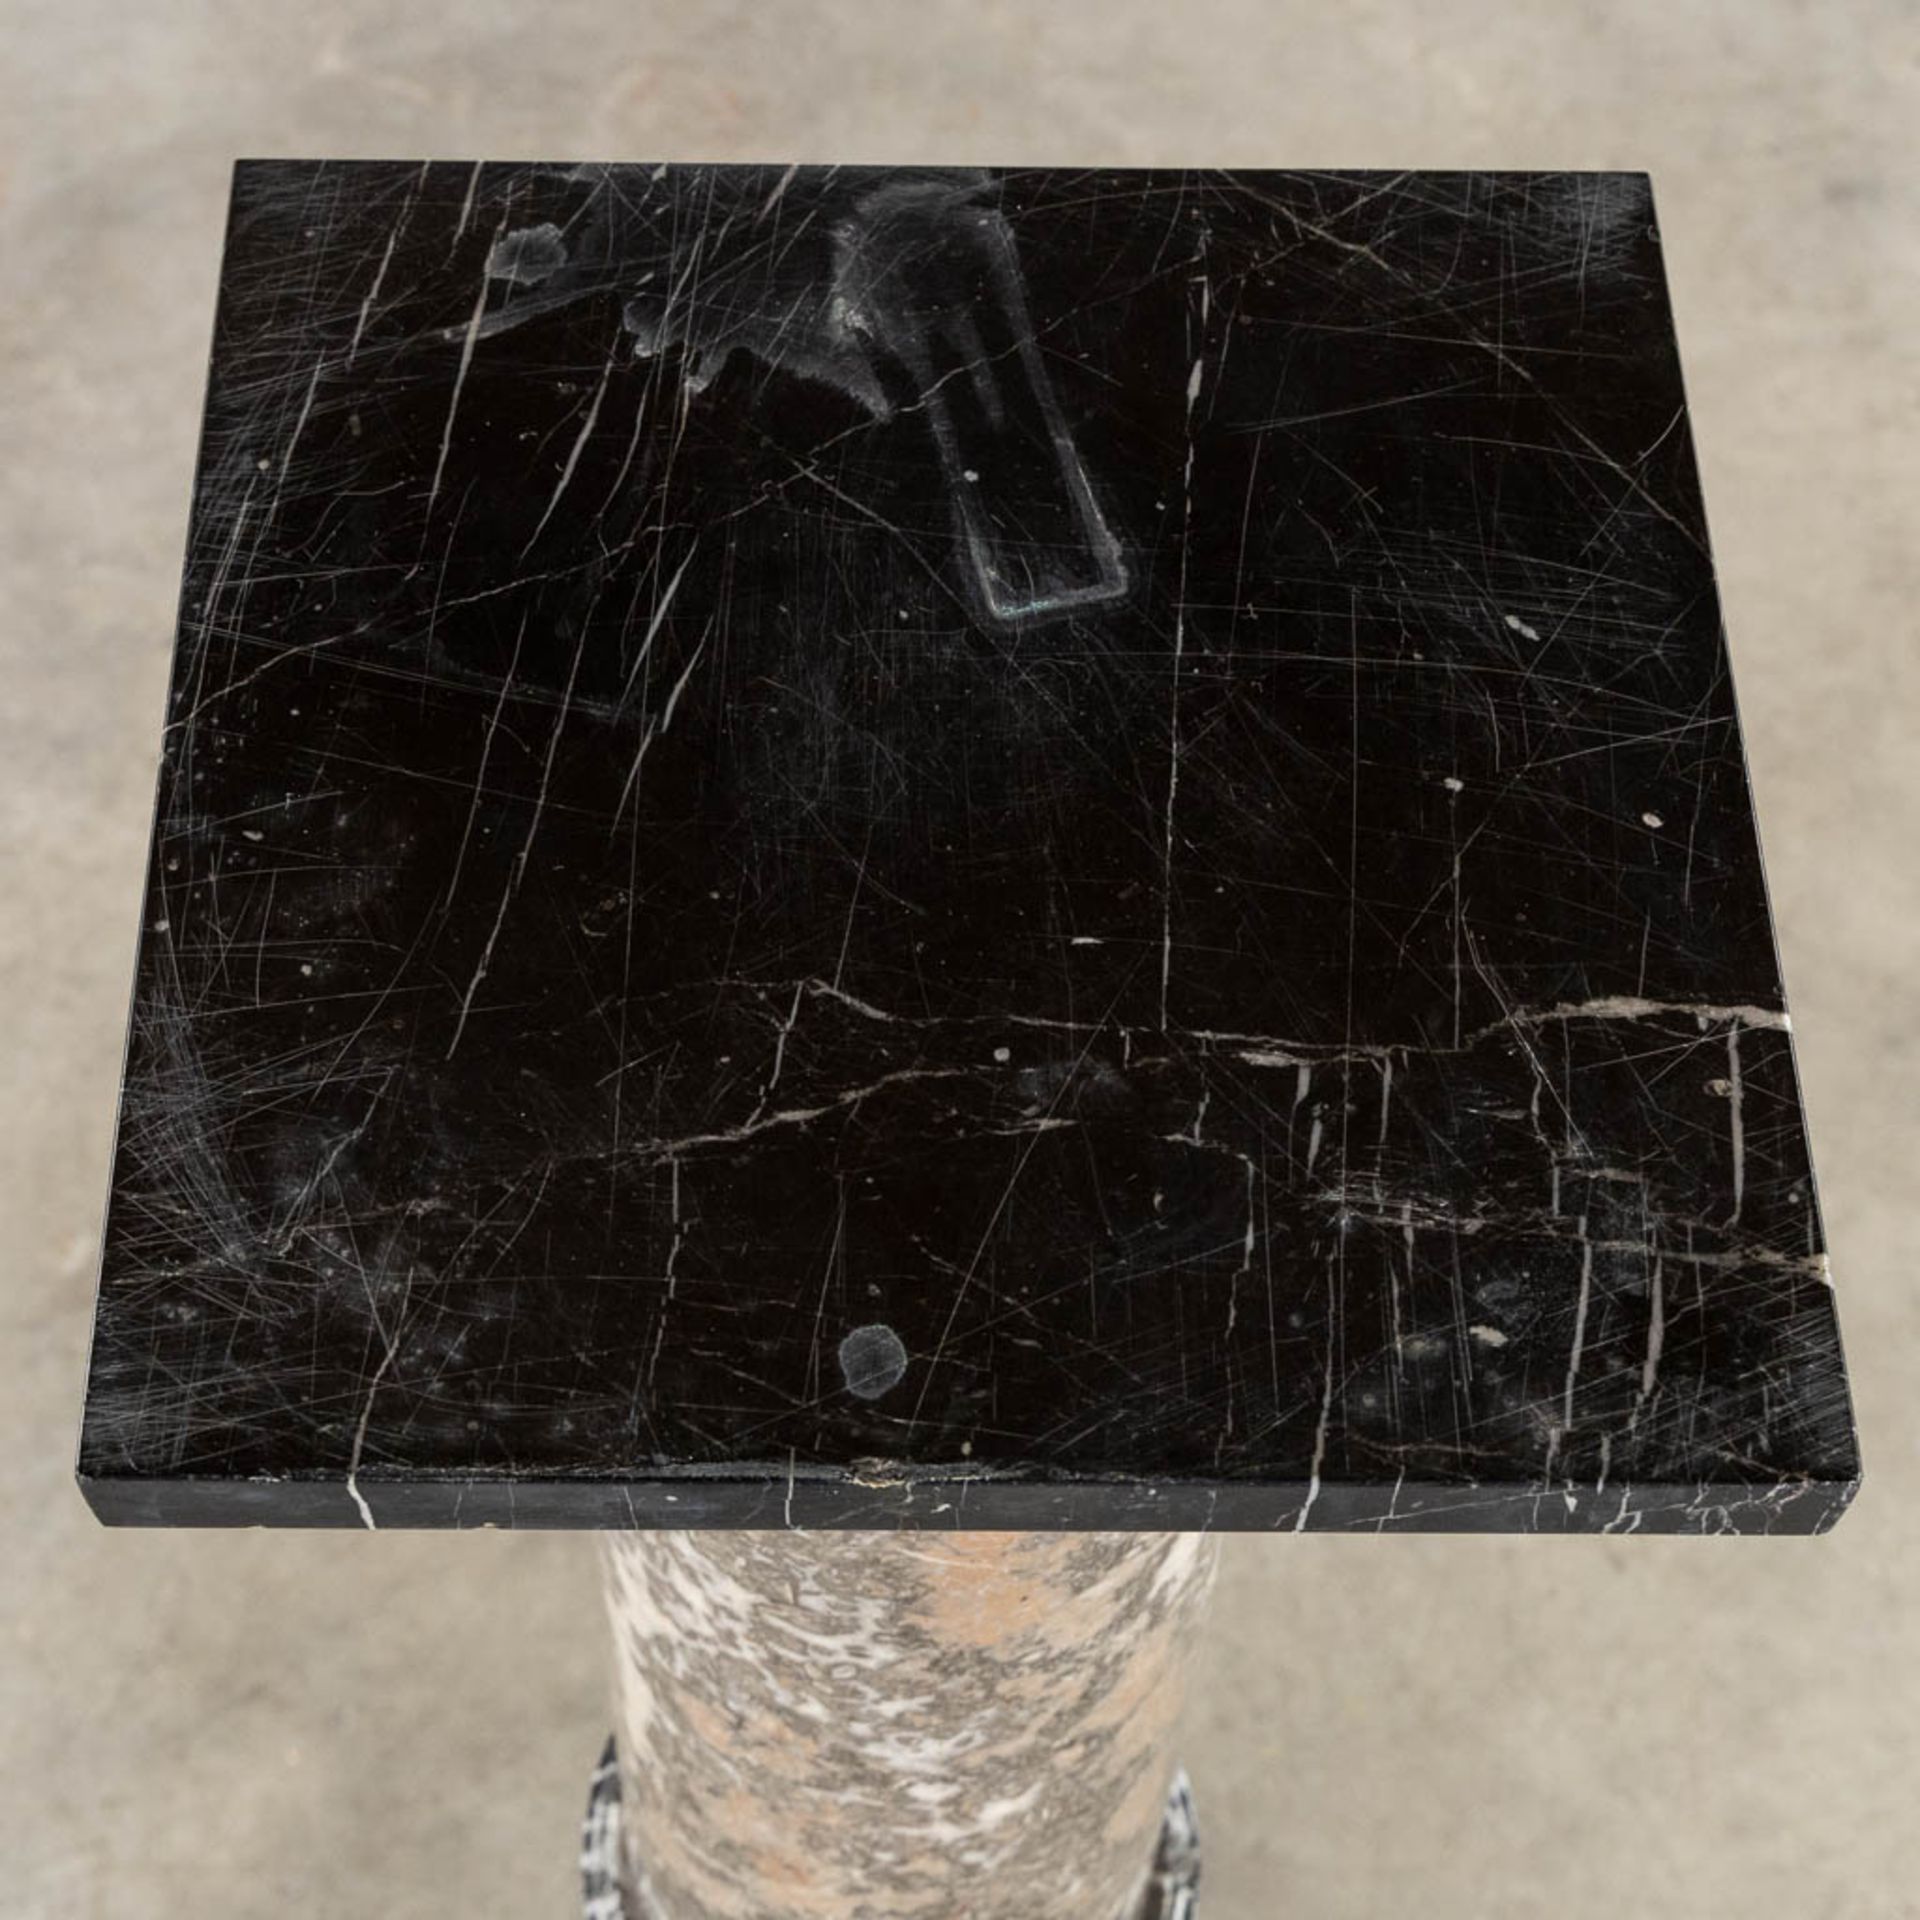 An antique pedestal, black, grey and brown marble. Circa 1900. (L:27 x W:27 x H:115 cm) - Image 7 of 9